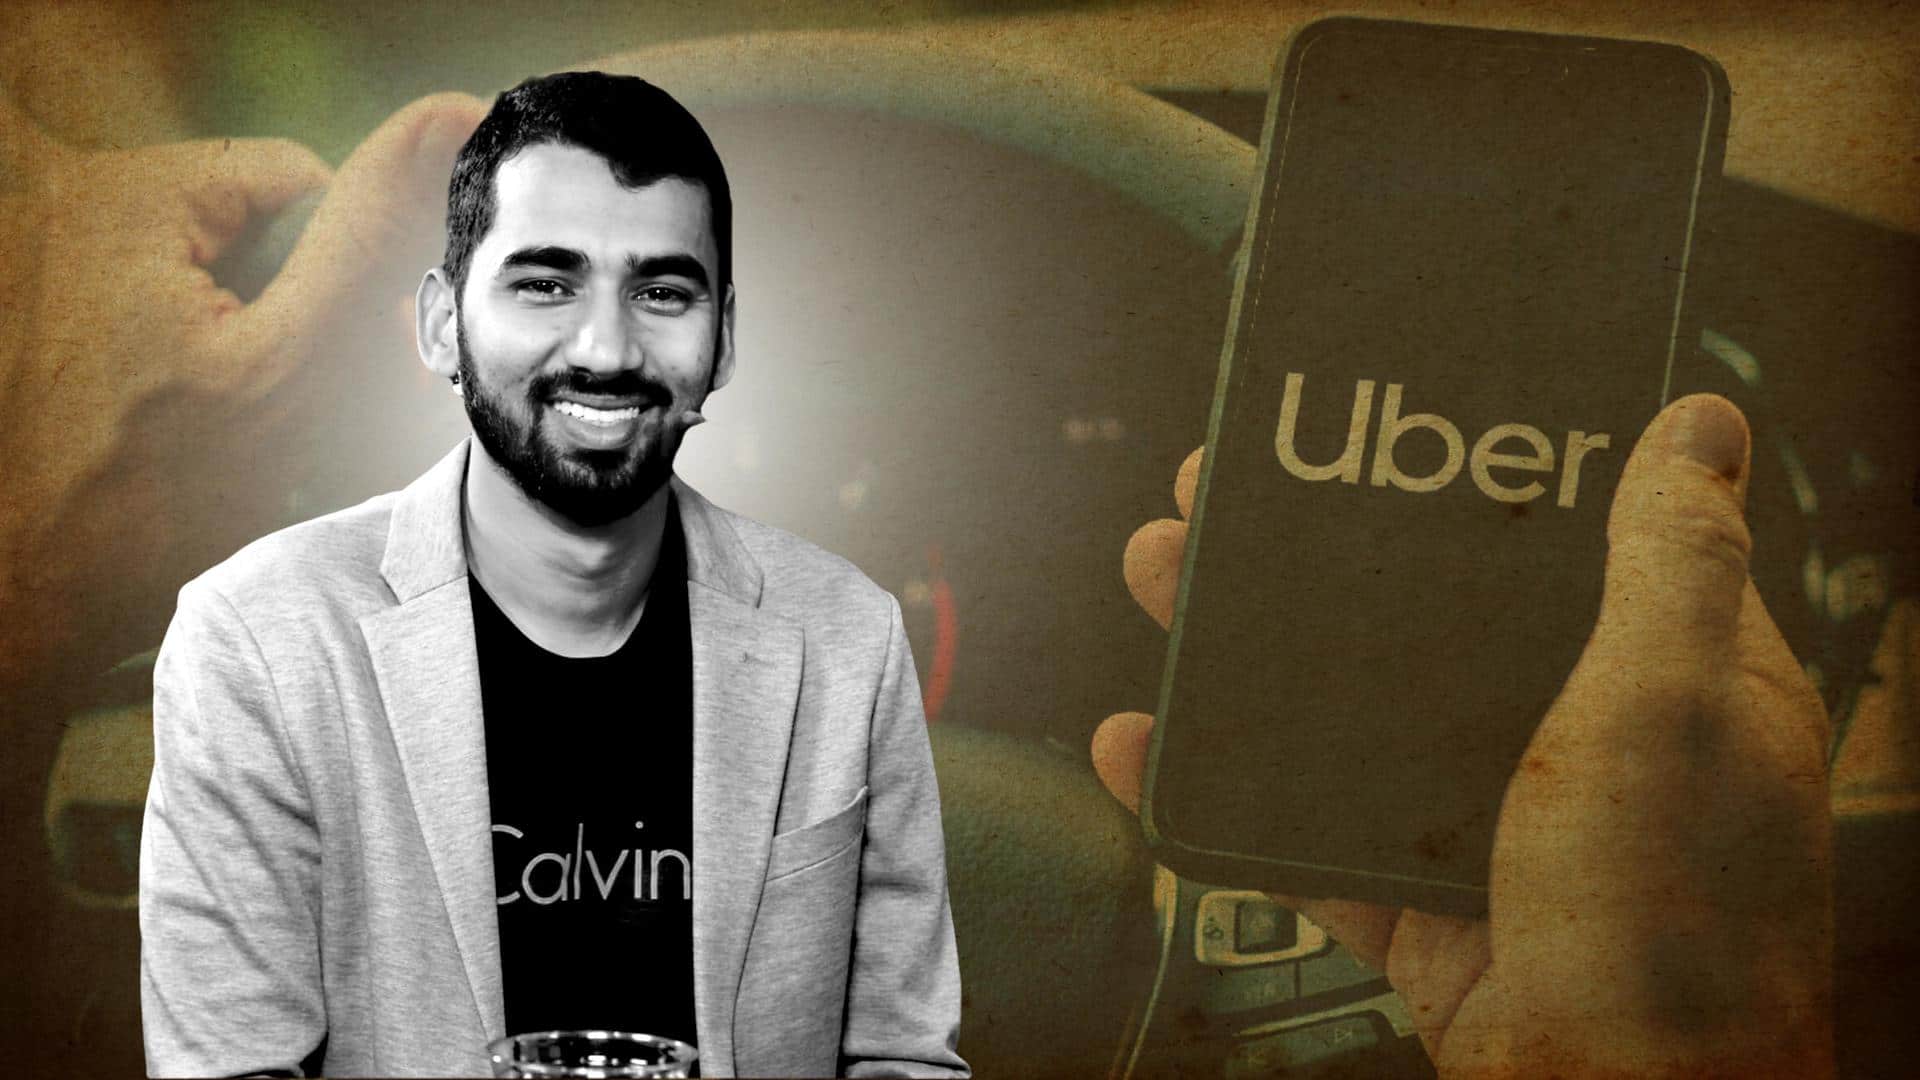 This Indian researcher earned Rs. 4.6L for detecting Uber's bug